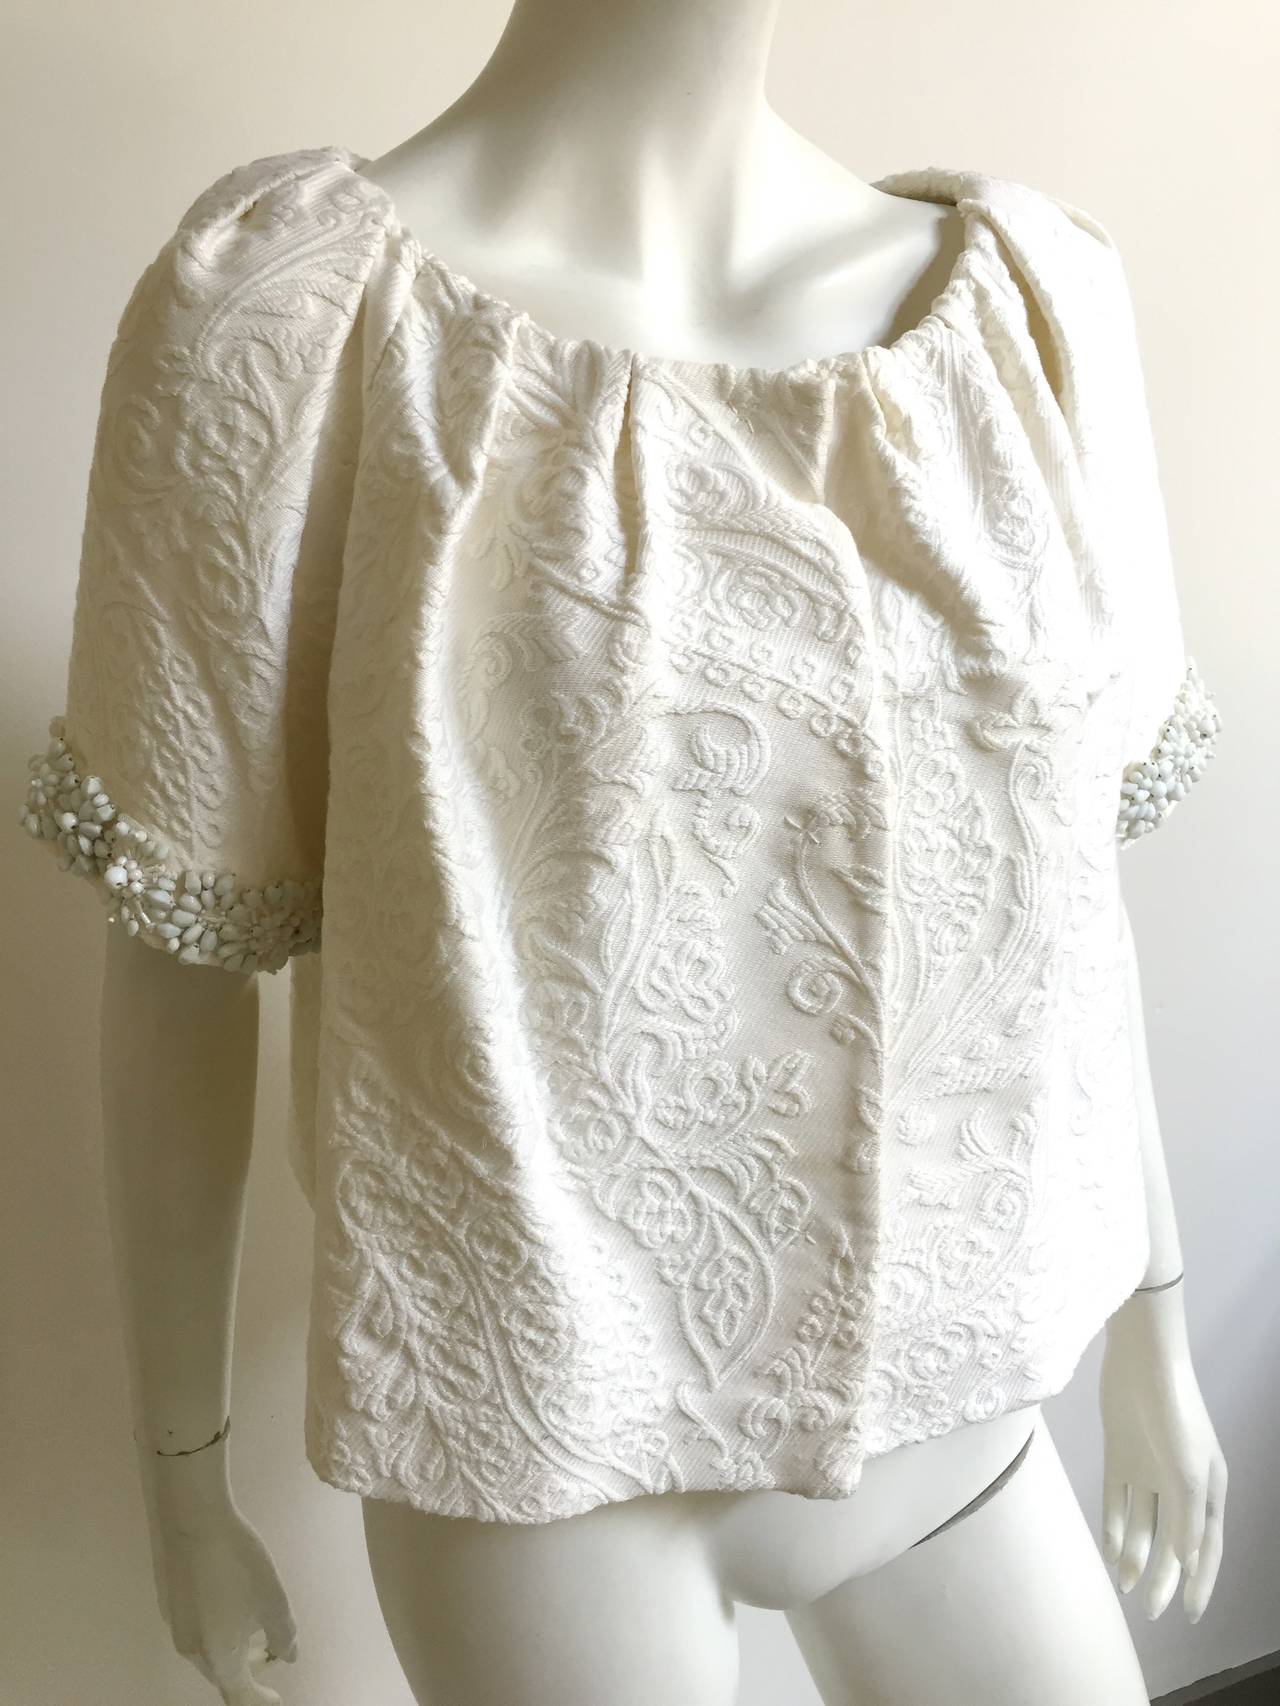 Giambattista Valli Paris white damask embellished open neck short sleeve jacket  size 10 / 44 and made in Italy.  There are 3 snap front buttons and jacket is lined. Gorgeous beaded sleeve trim adds that extra pizzazz.  
The height of jacket is 20